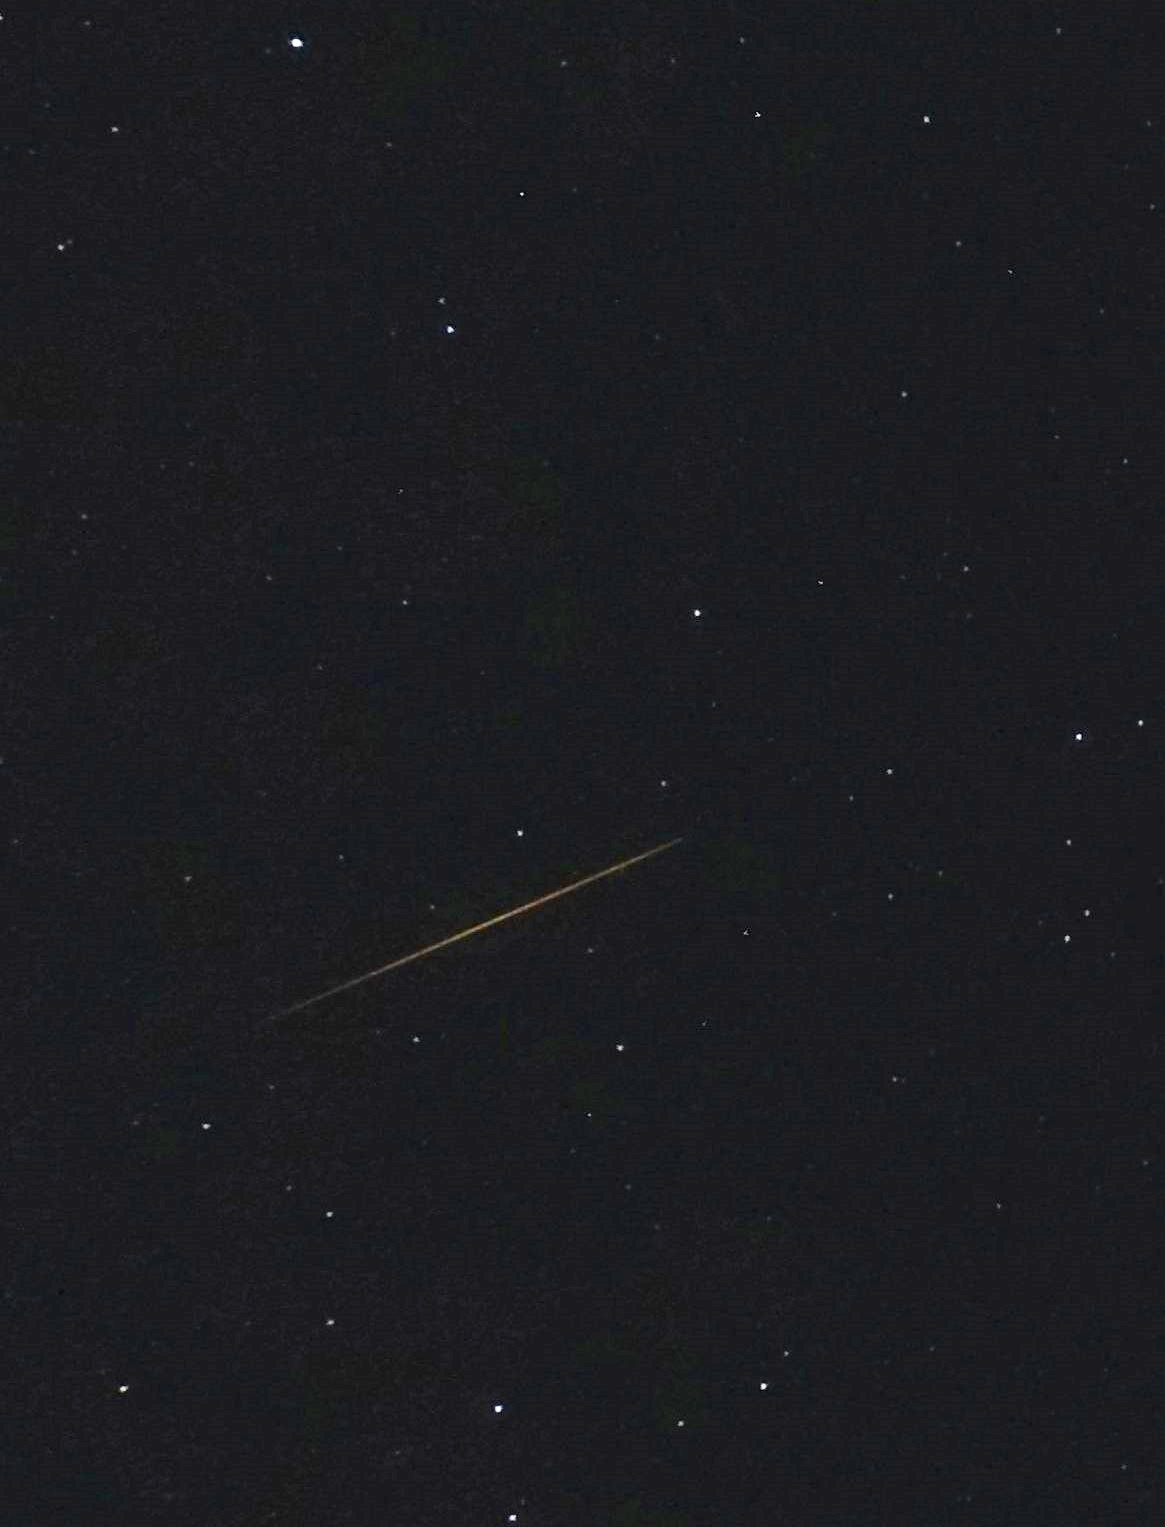 A Lyrid meteor by Bill Samson, not sure of the date but thanks Bill nonetheless.